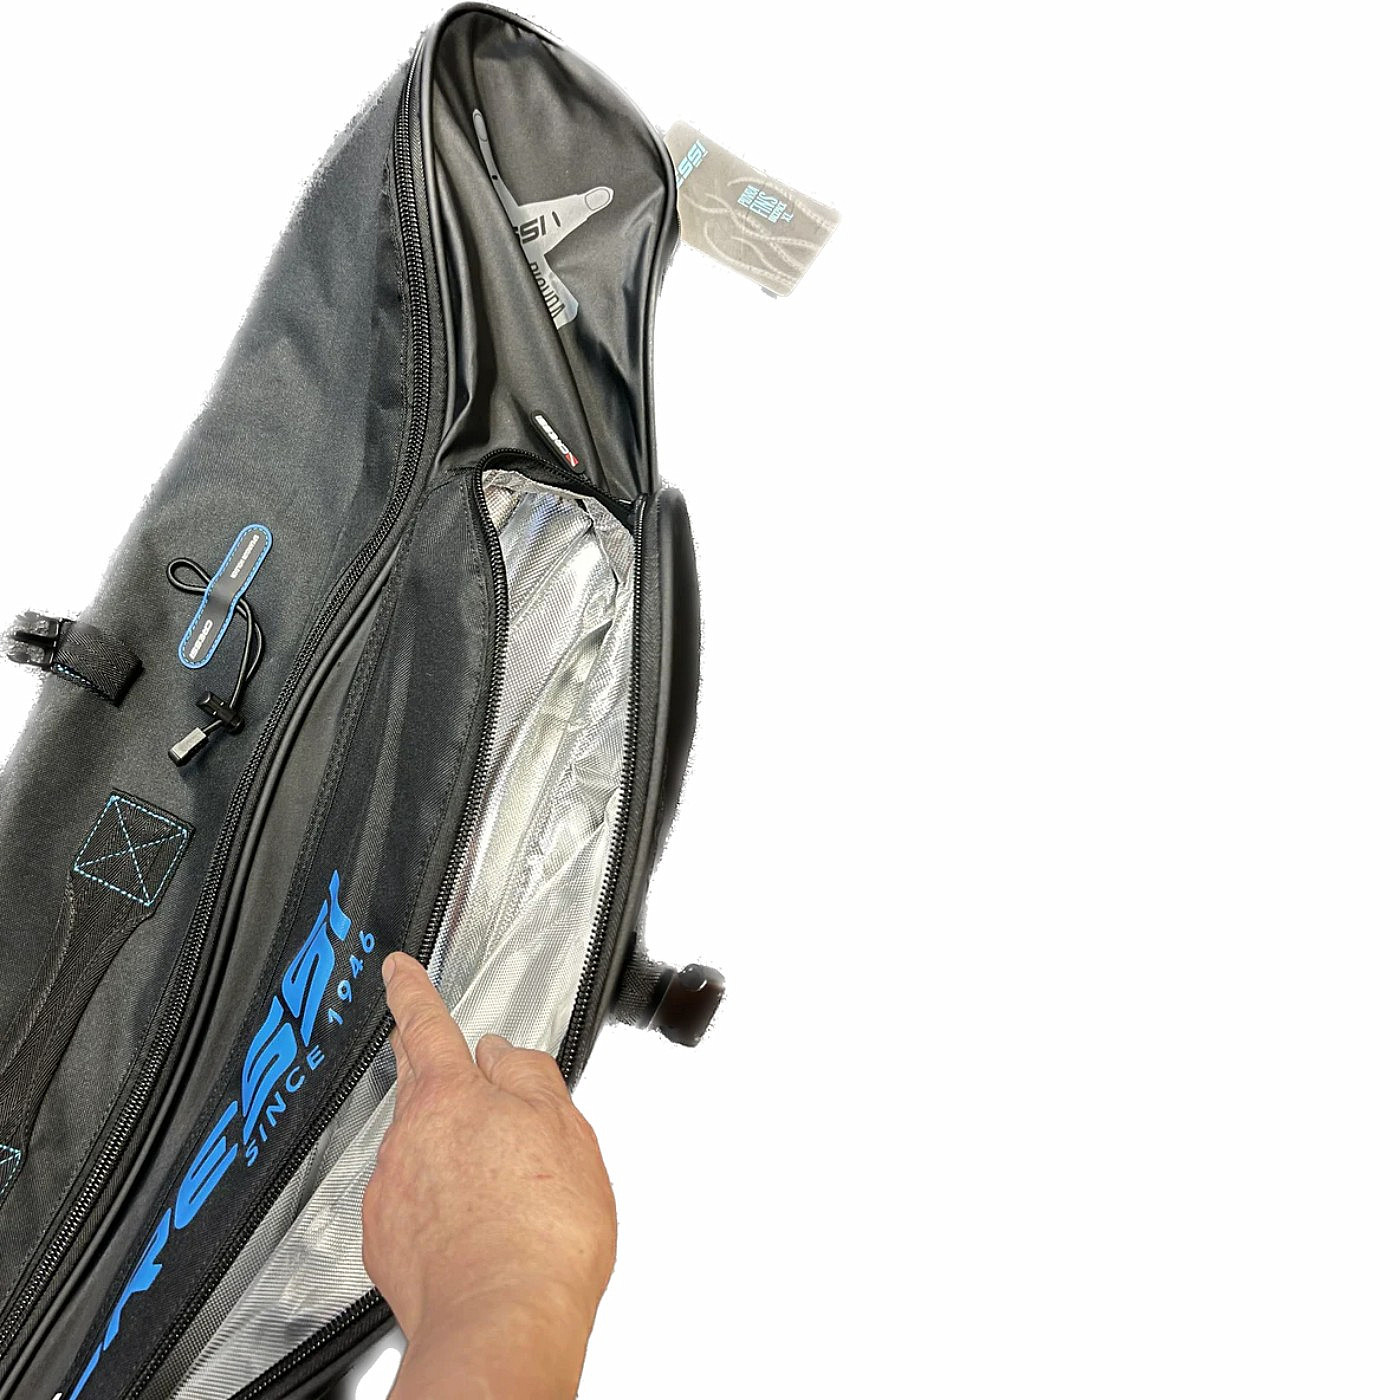 Cressi Piovra XL Freediving Spearfishing Backpack Bag